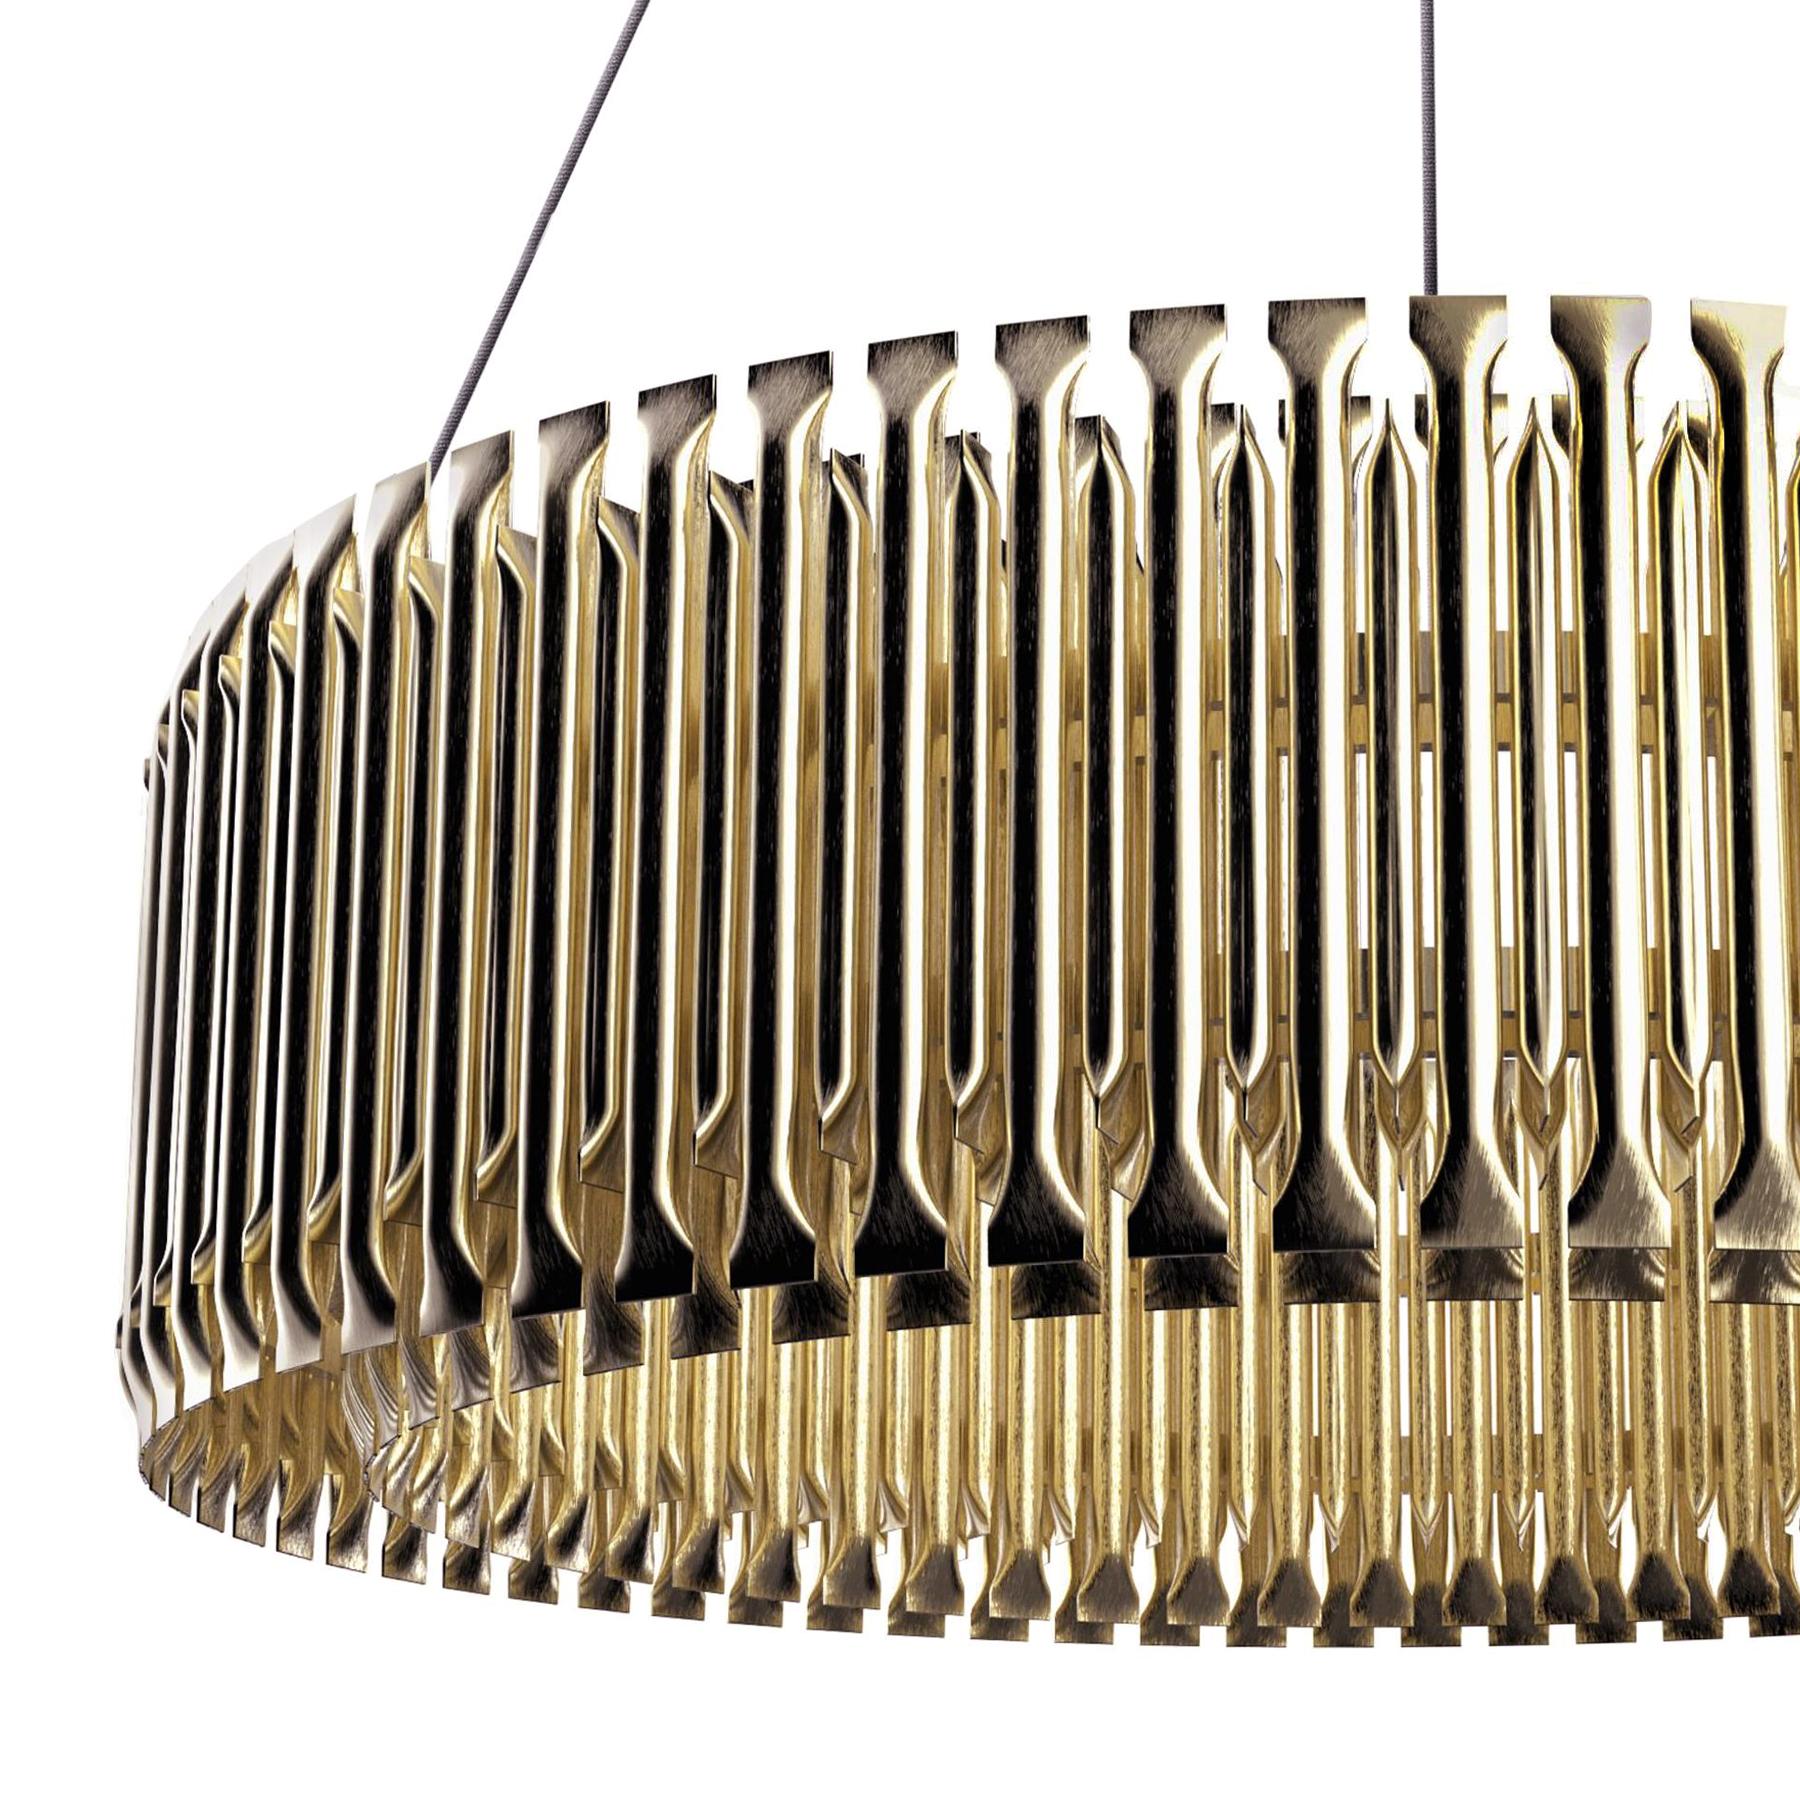 Chandelier doe round with structure and all tubes
in solid brass in brushed brass finish. With 24 bulbs,
lamp holder type G9, max 40 watt/bulb.
Bulbs not included. With 3 steel cables and brass rose
in same finish as the chandelier. With 100cm